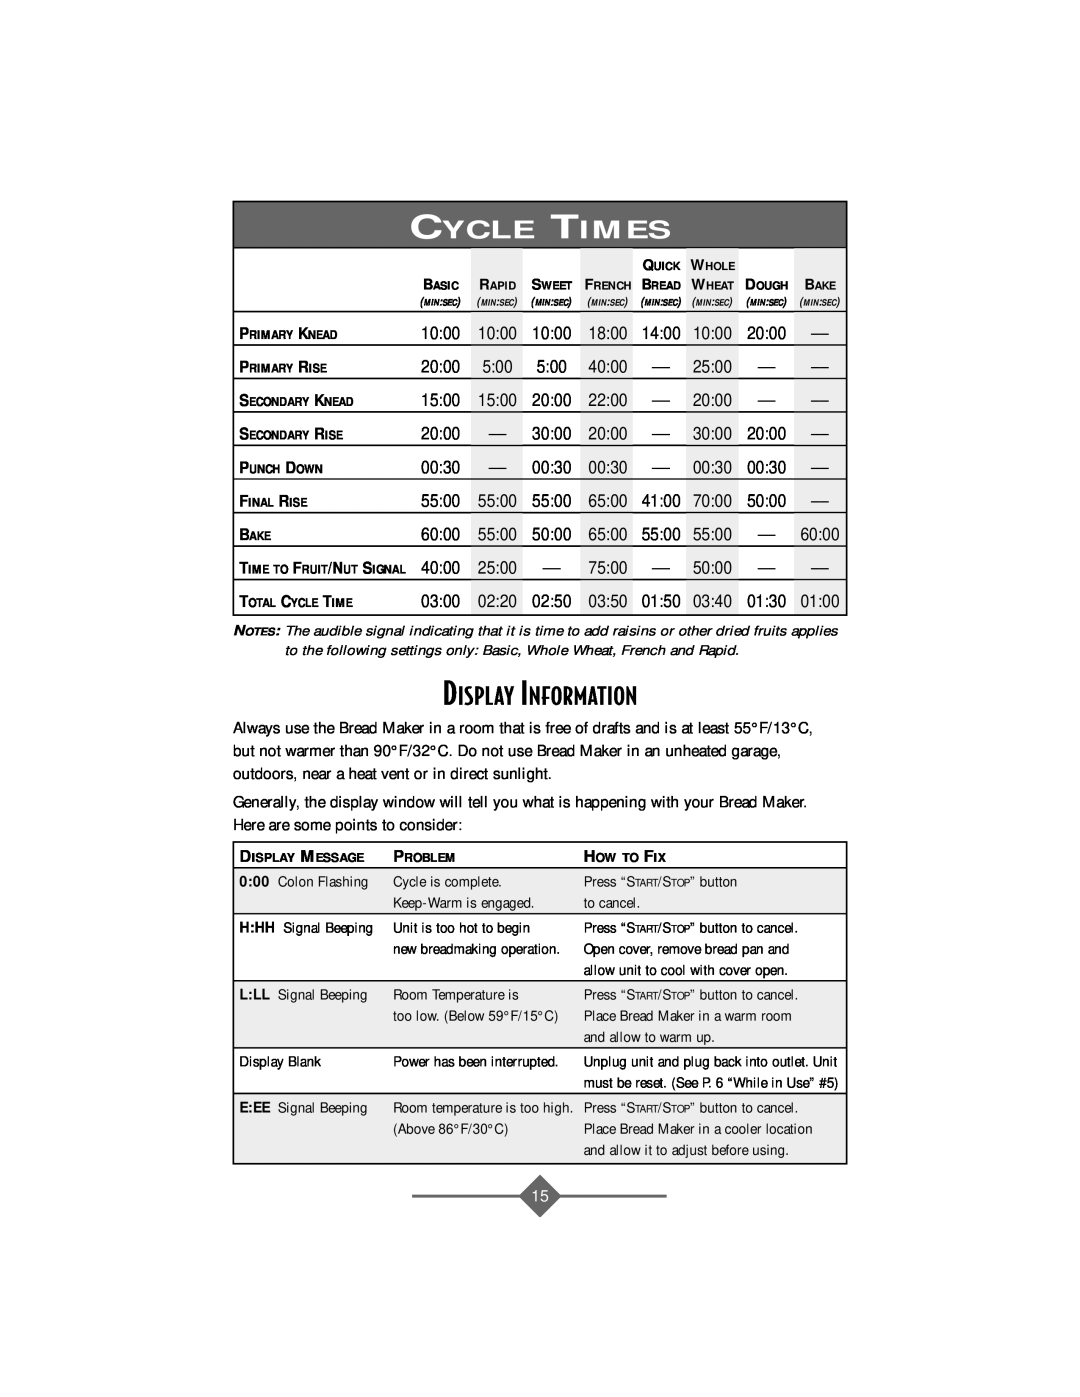 Sunbeam Bread/Dough Maker manual Cycle Times, Display Information 